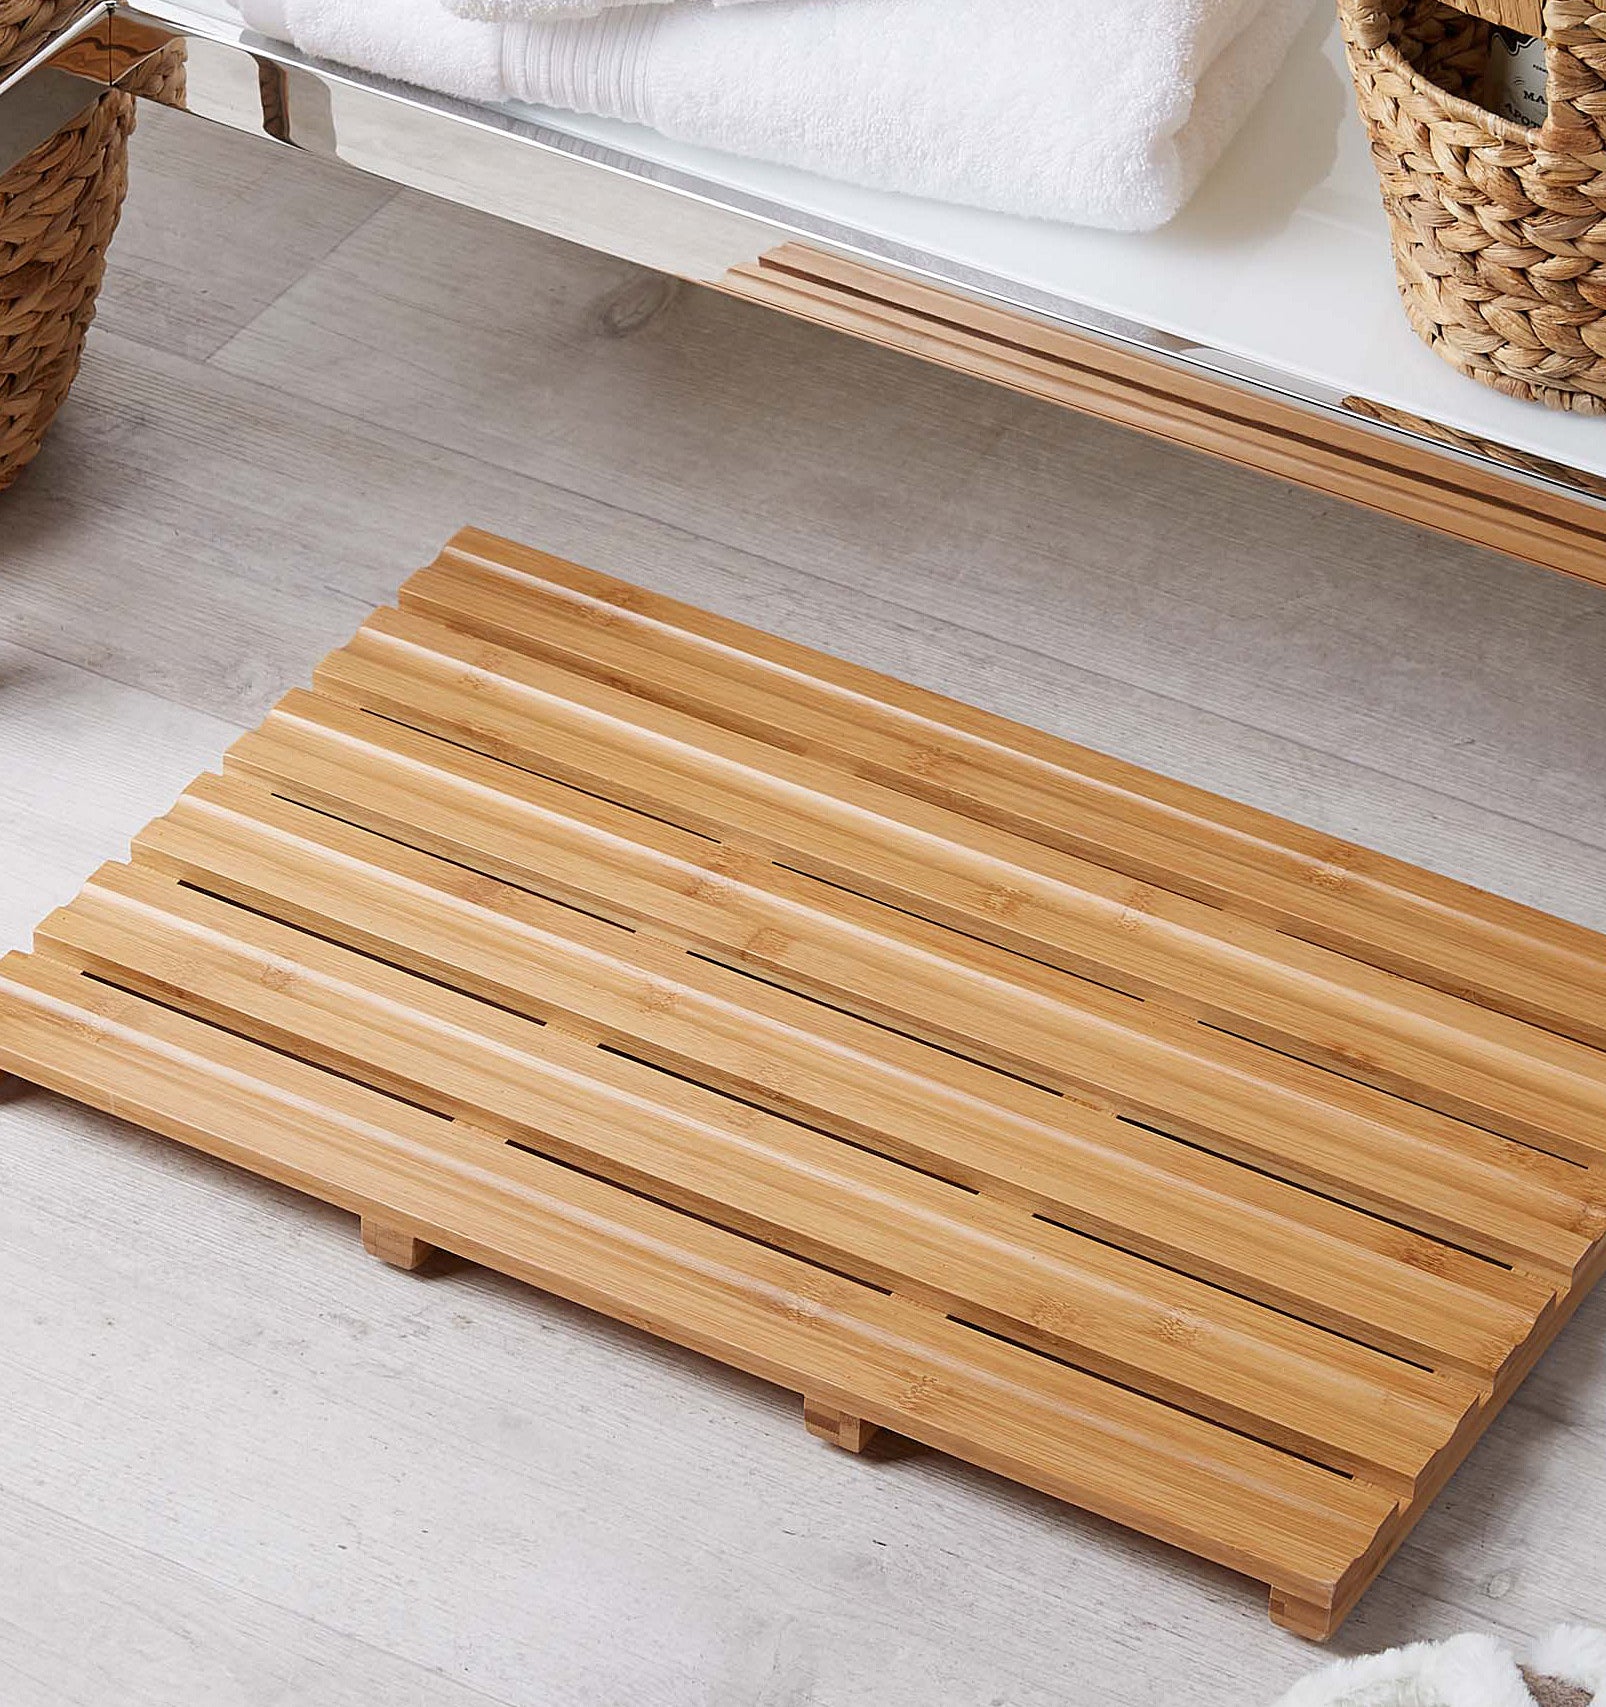 A slatted wooden bath mat in front of a bathroom sink